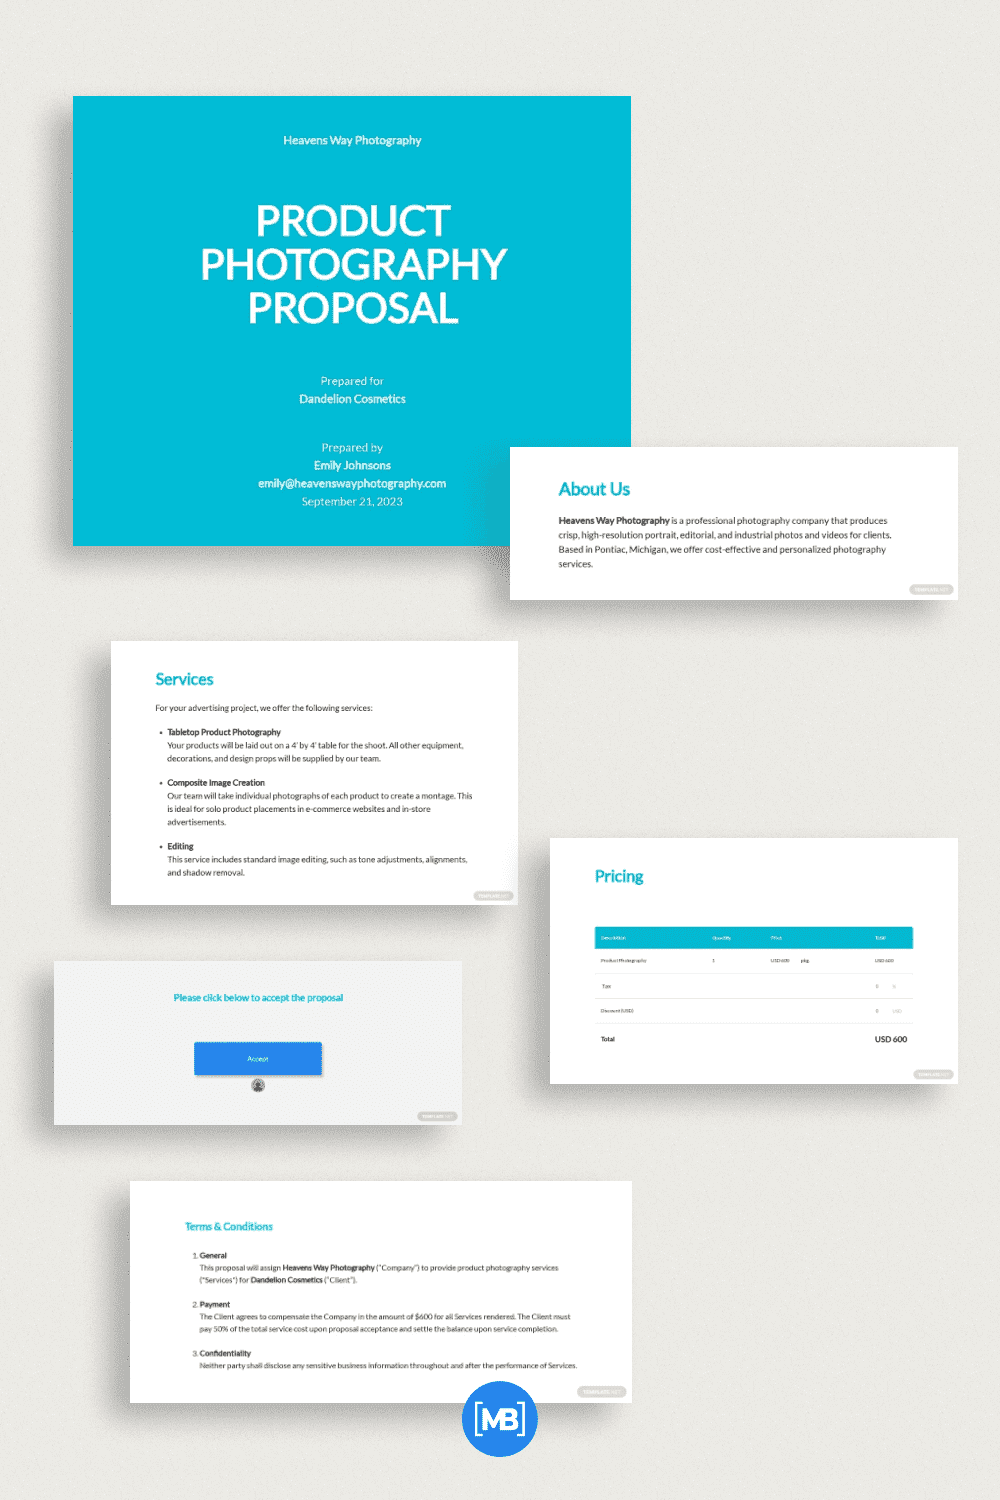 Product photography proposal template.